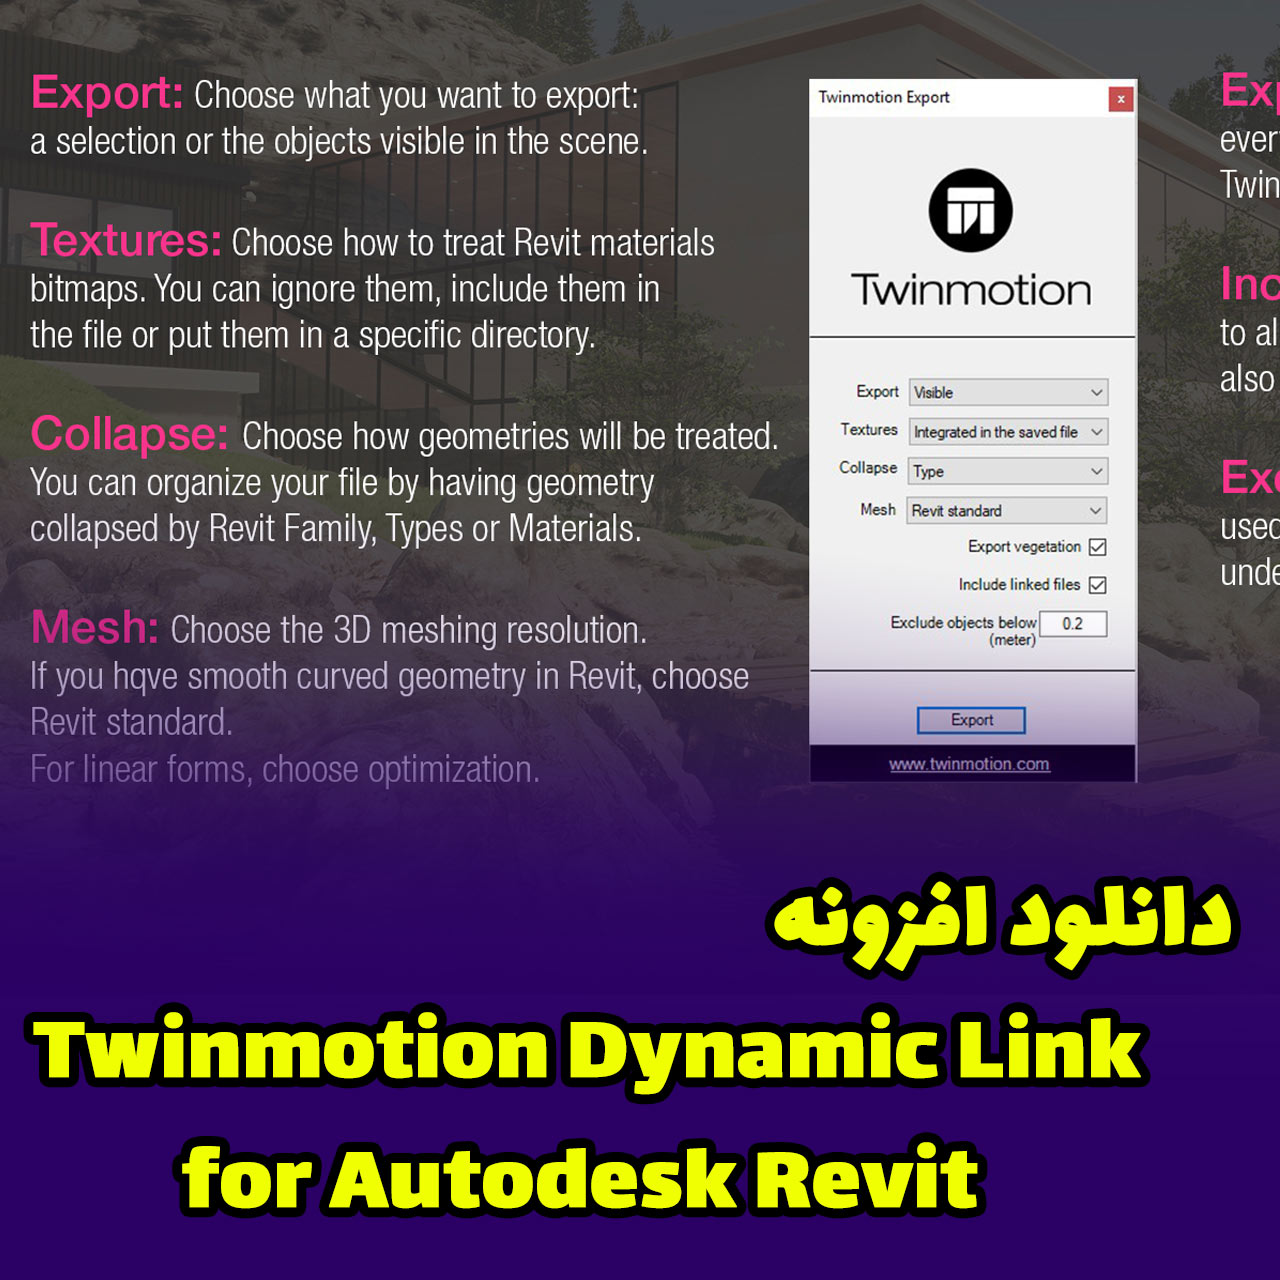 twinmotion dynamic link for autodesk revit download